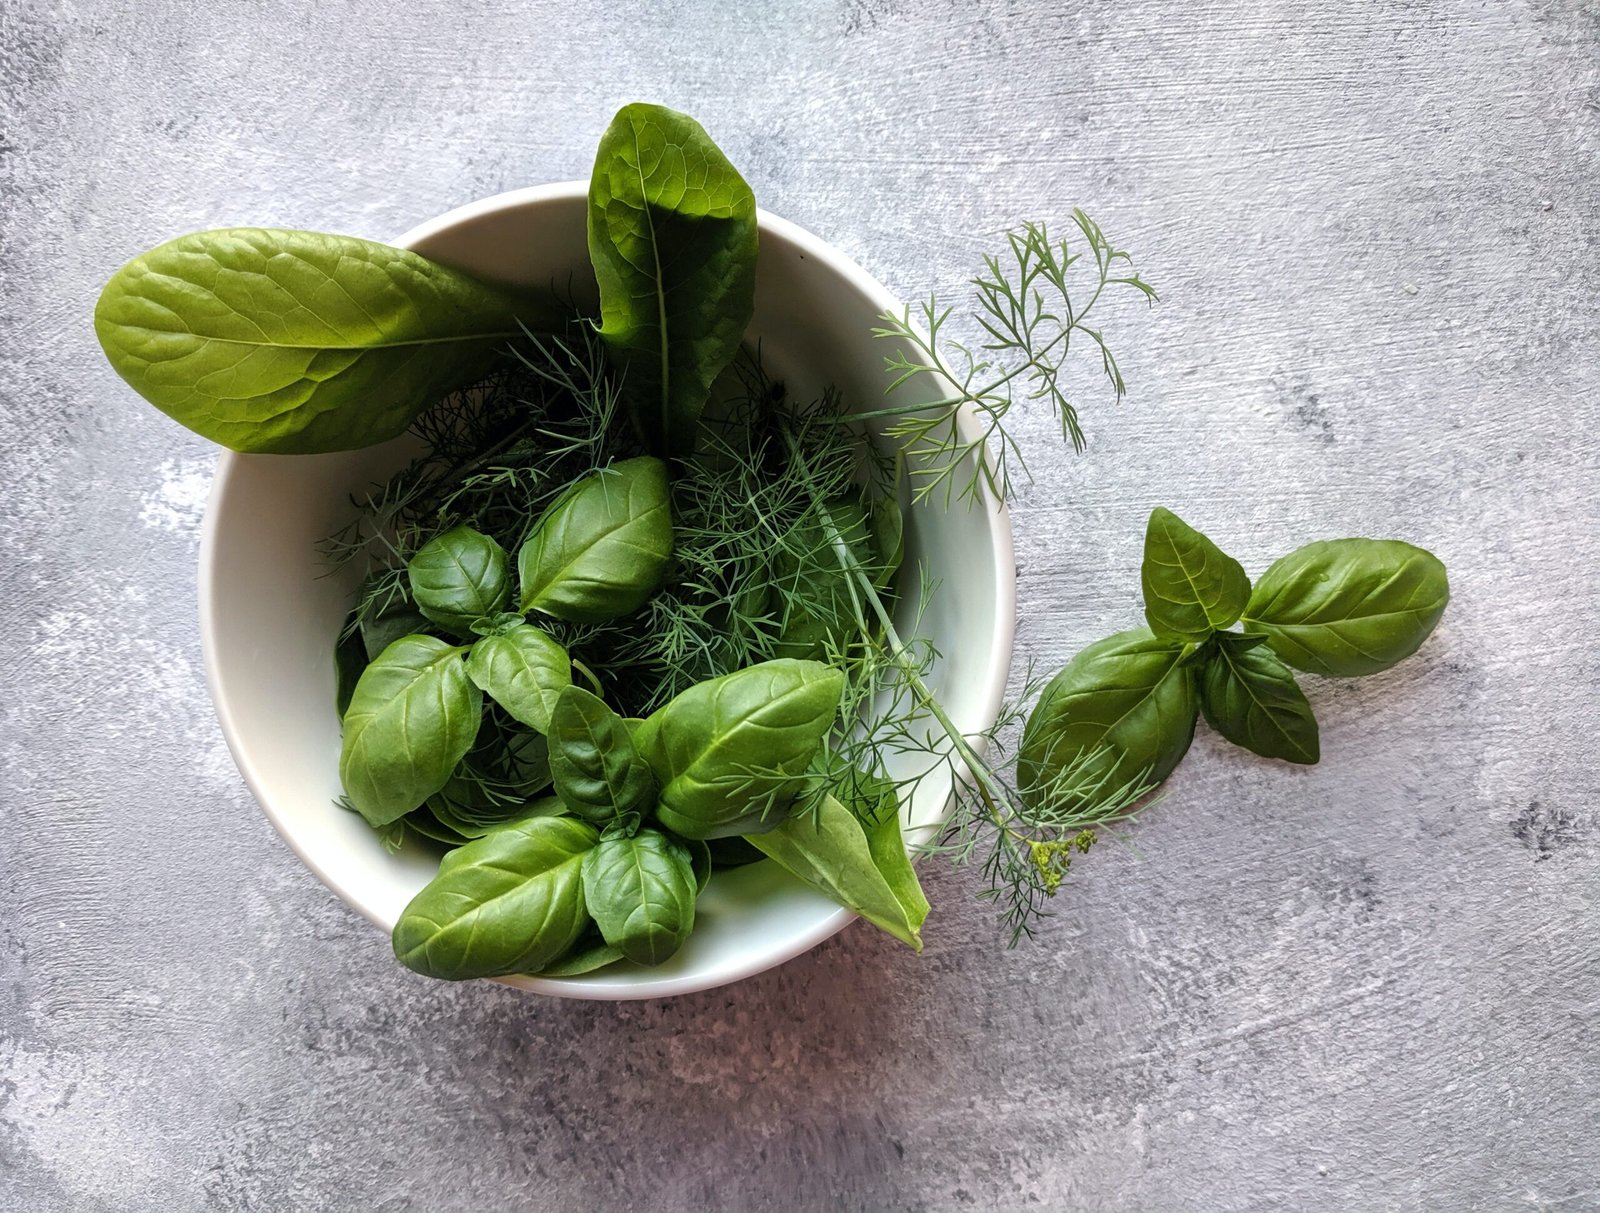 How to grow your own herbs indoors: year-round greenery at your fingertips